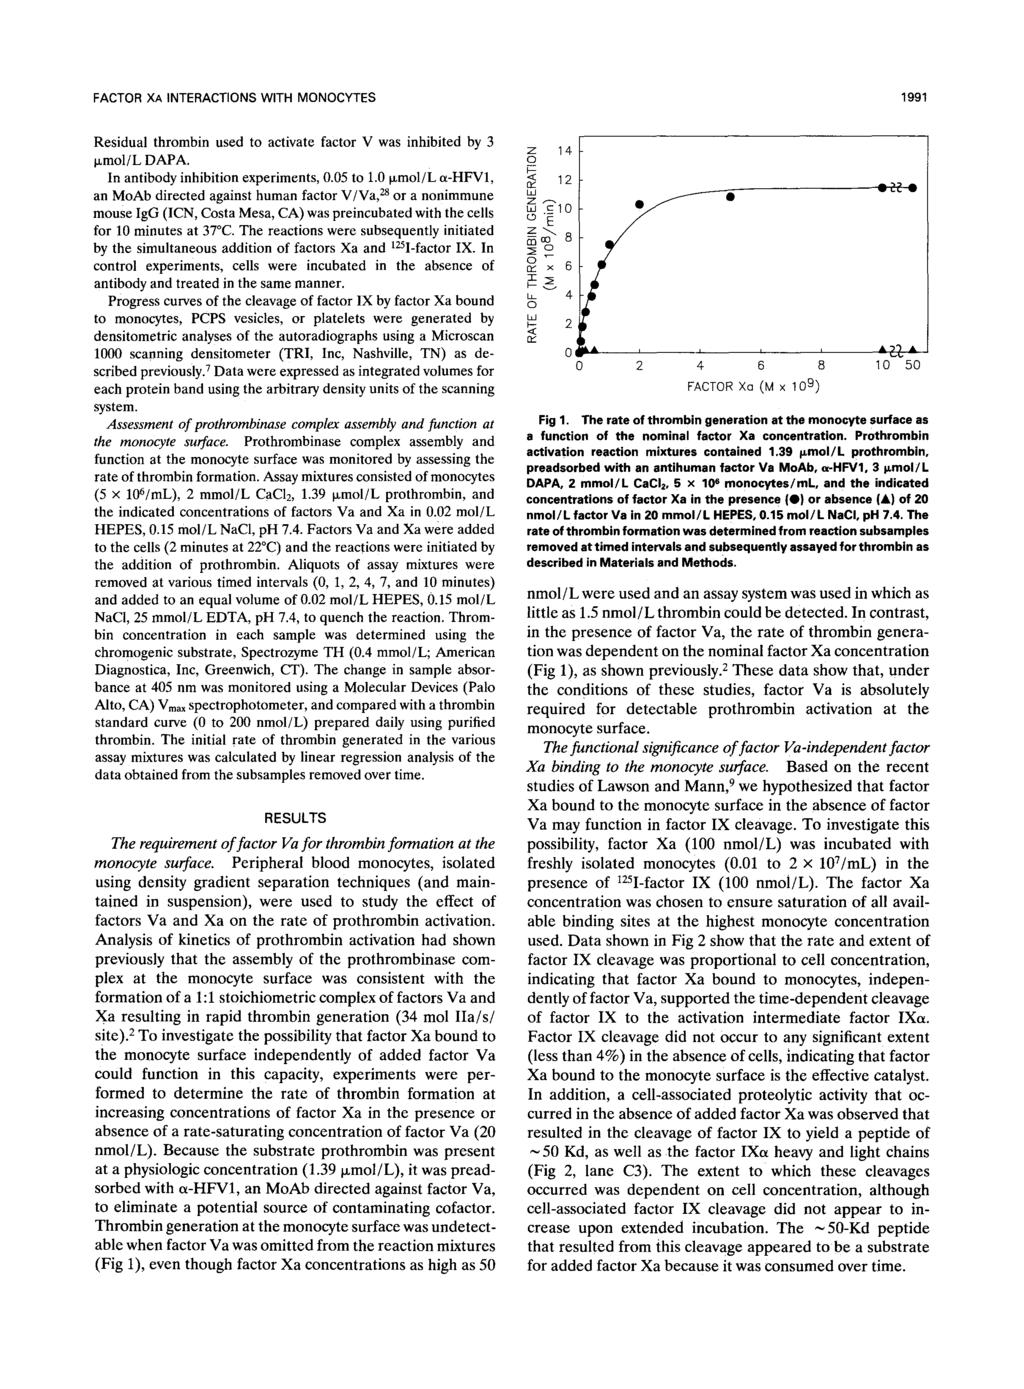 FACTOR XA INTERACTIONS WITH MONOCYTES 1991 Residual thrombin used to activate factor V was inhibited by 3 pmol/l DAPA. In antibody inhibition experiments, 0.05 to 1.